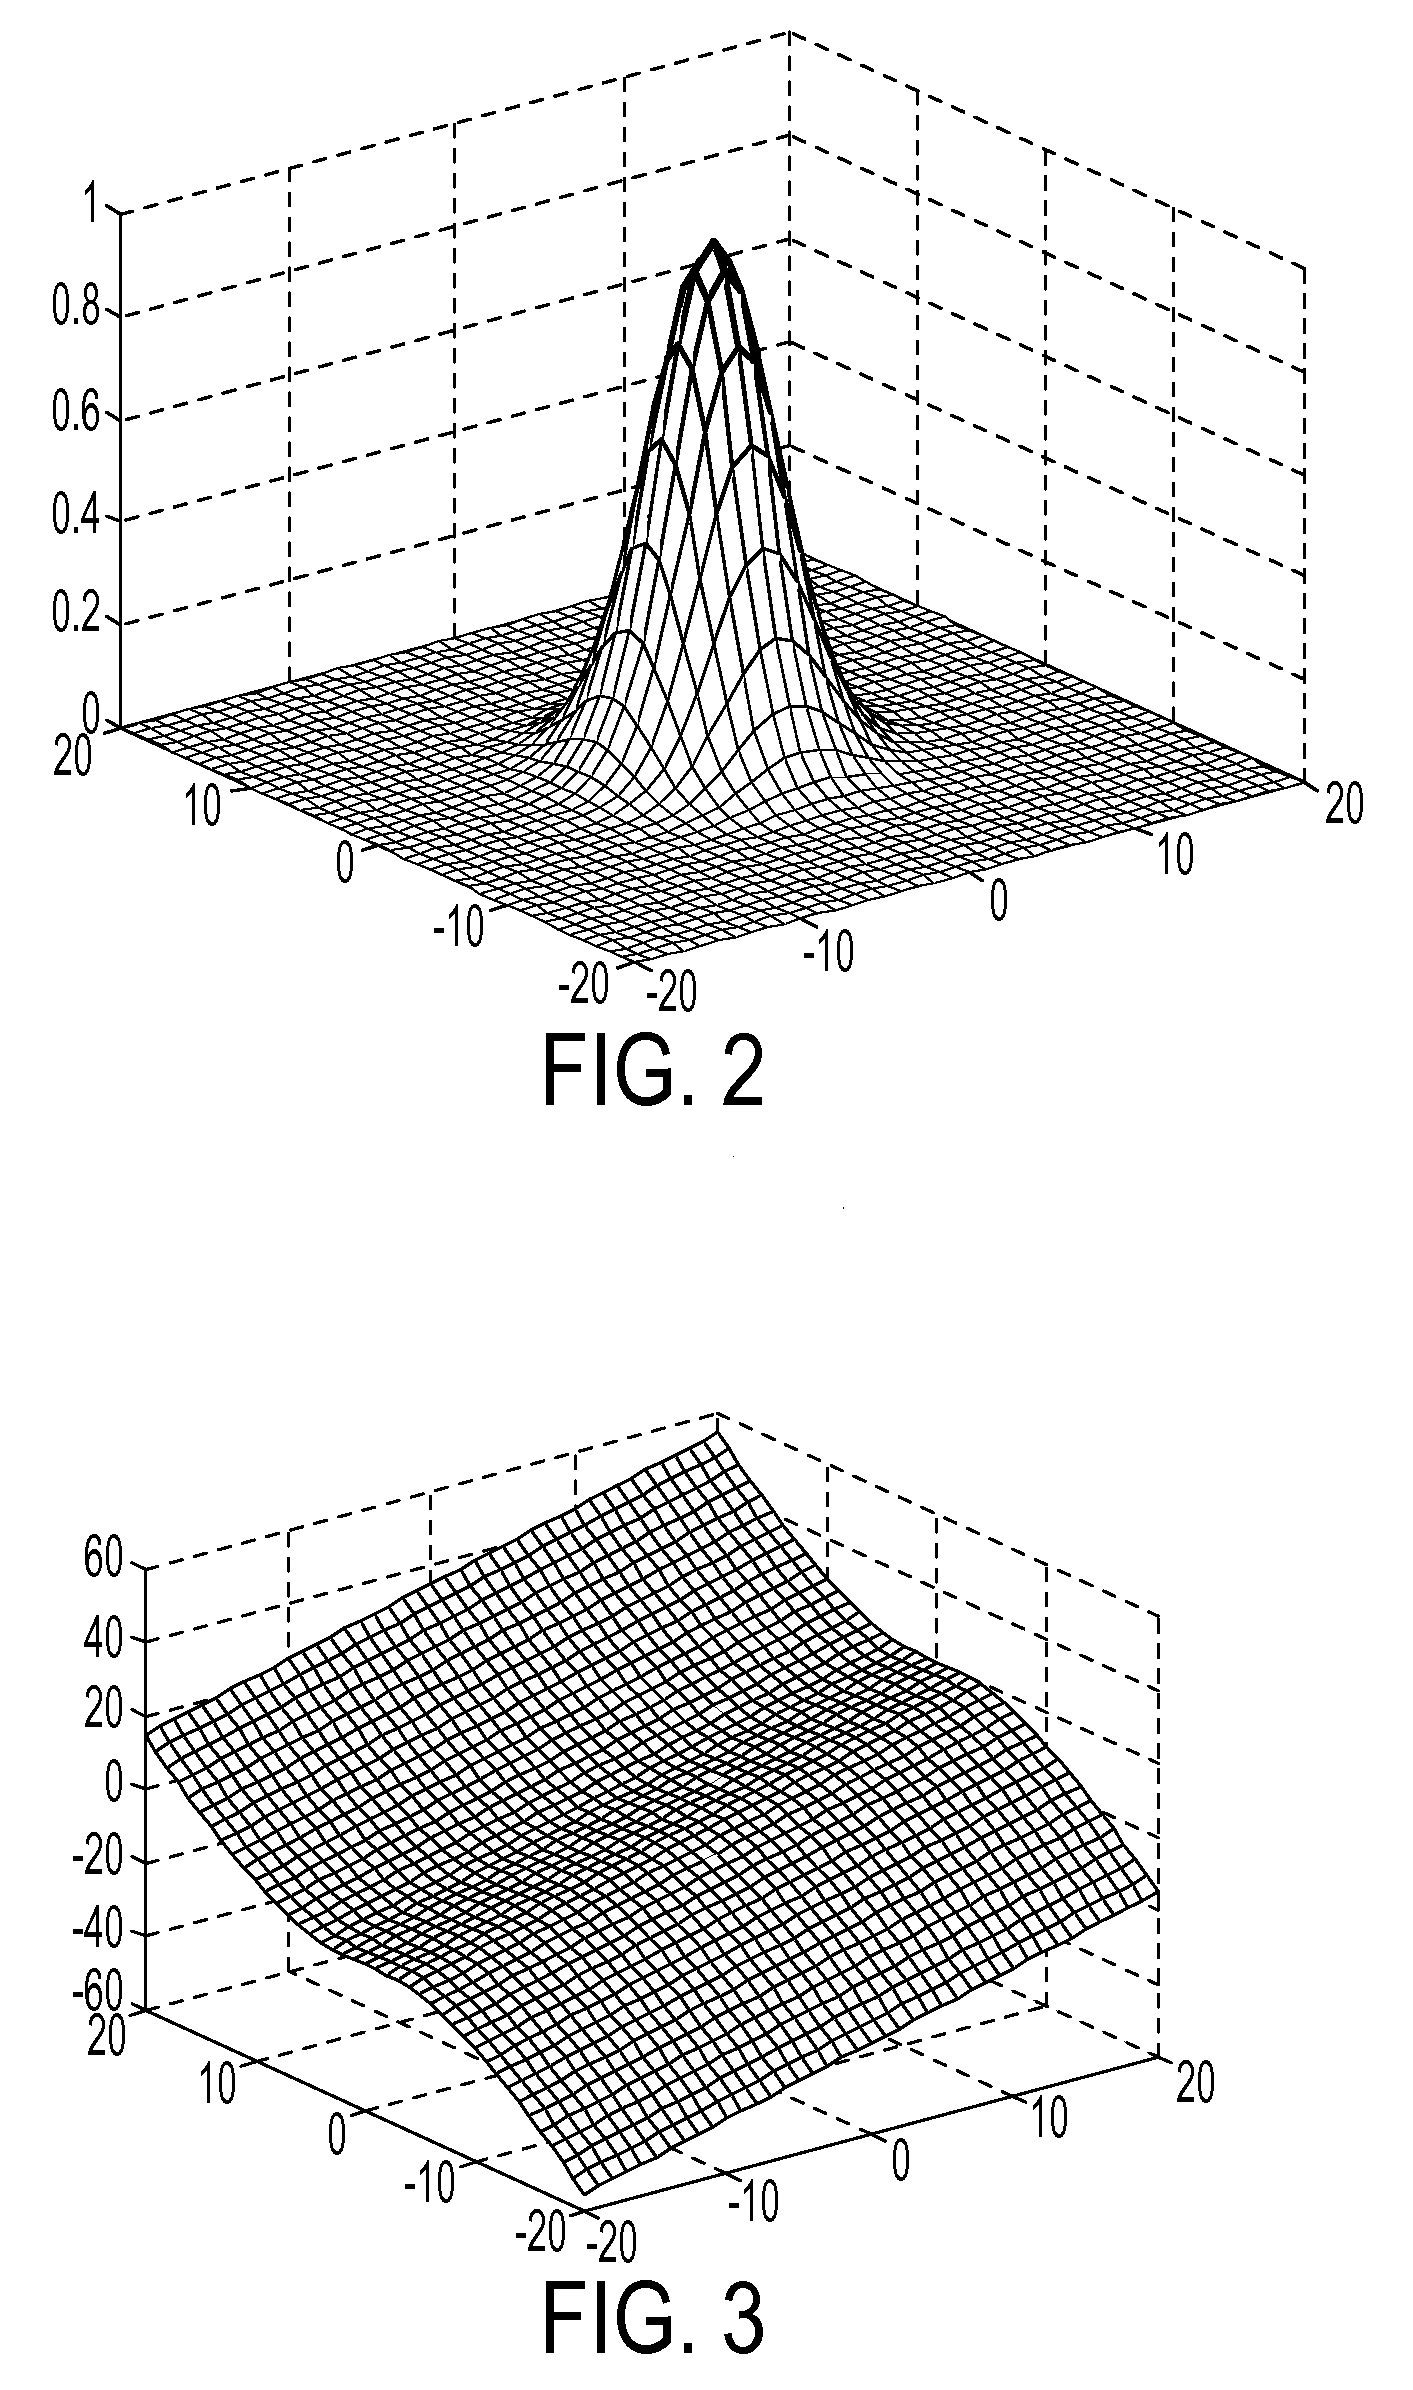 Local regression methods and systems for image processing systems